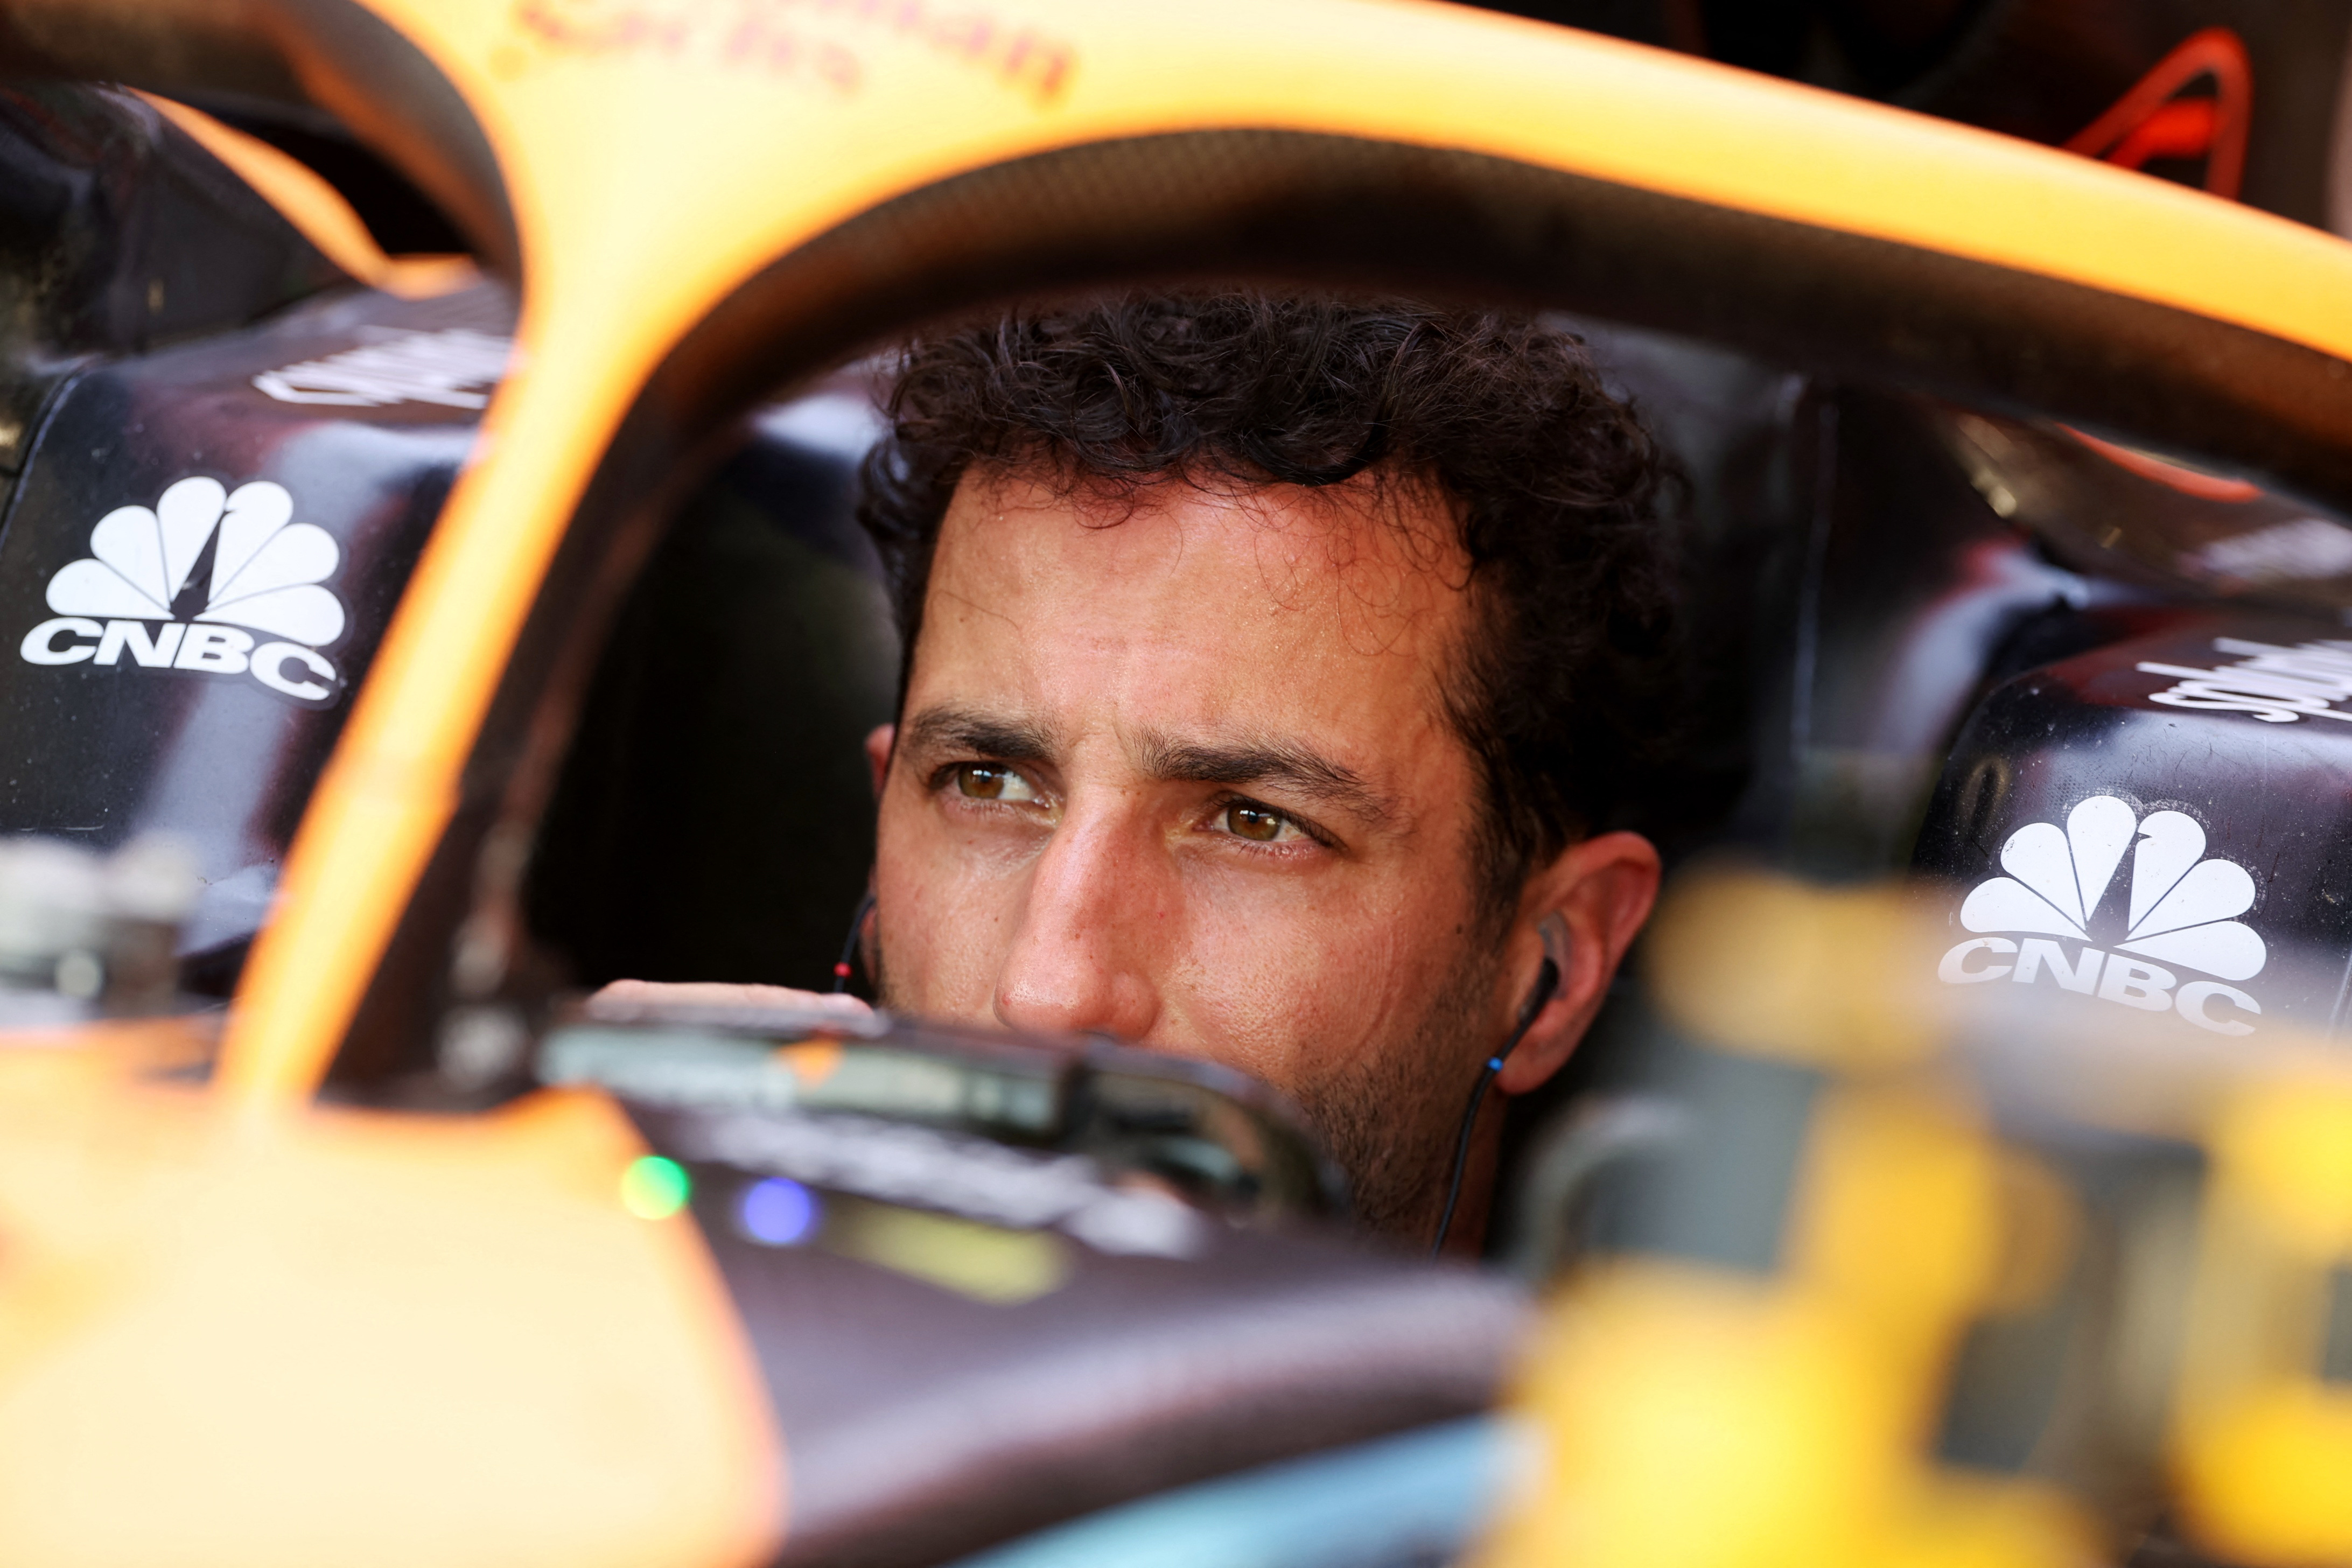 McLaren warned Daniel Ricciardo that he will not take him into account in 2023 and they will have to fix his departure (Photo: Reuters)